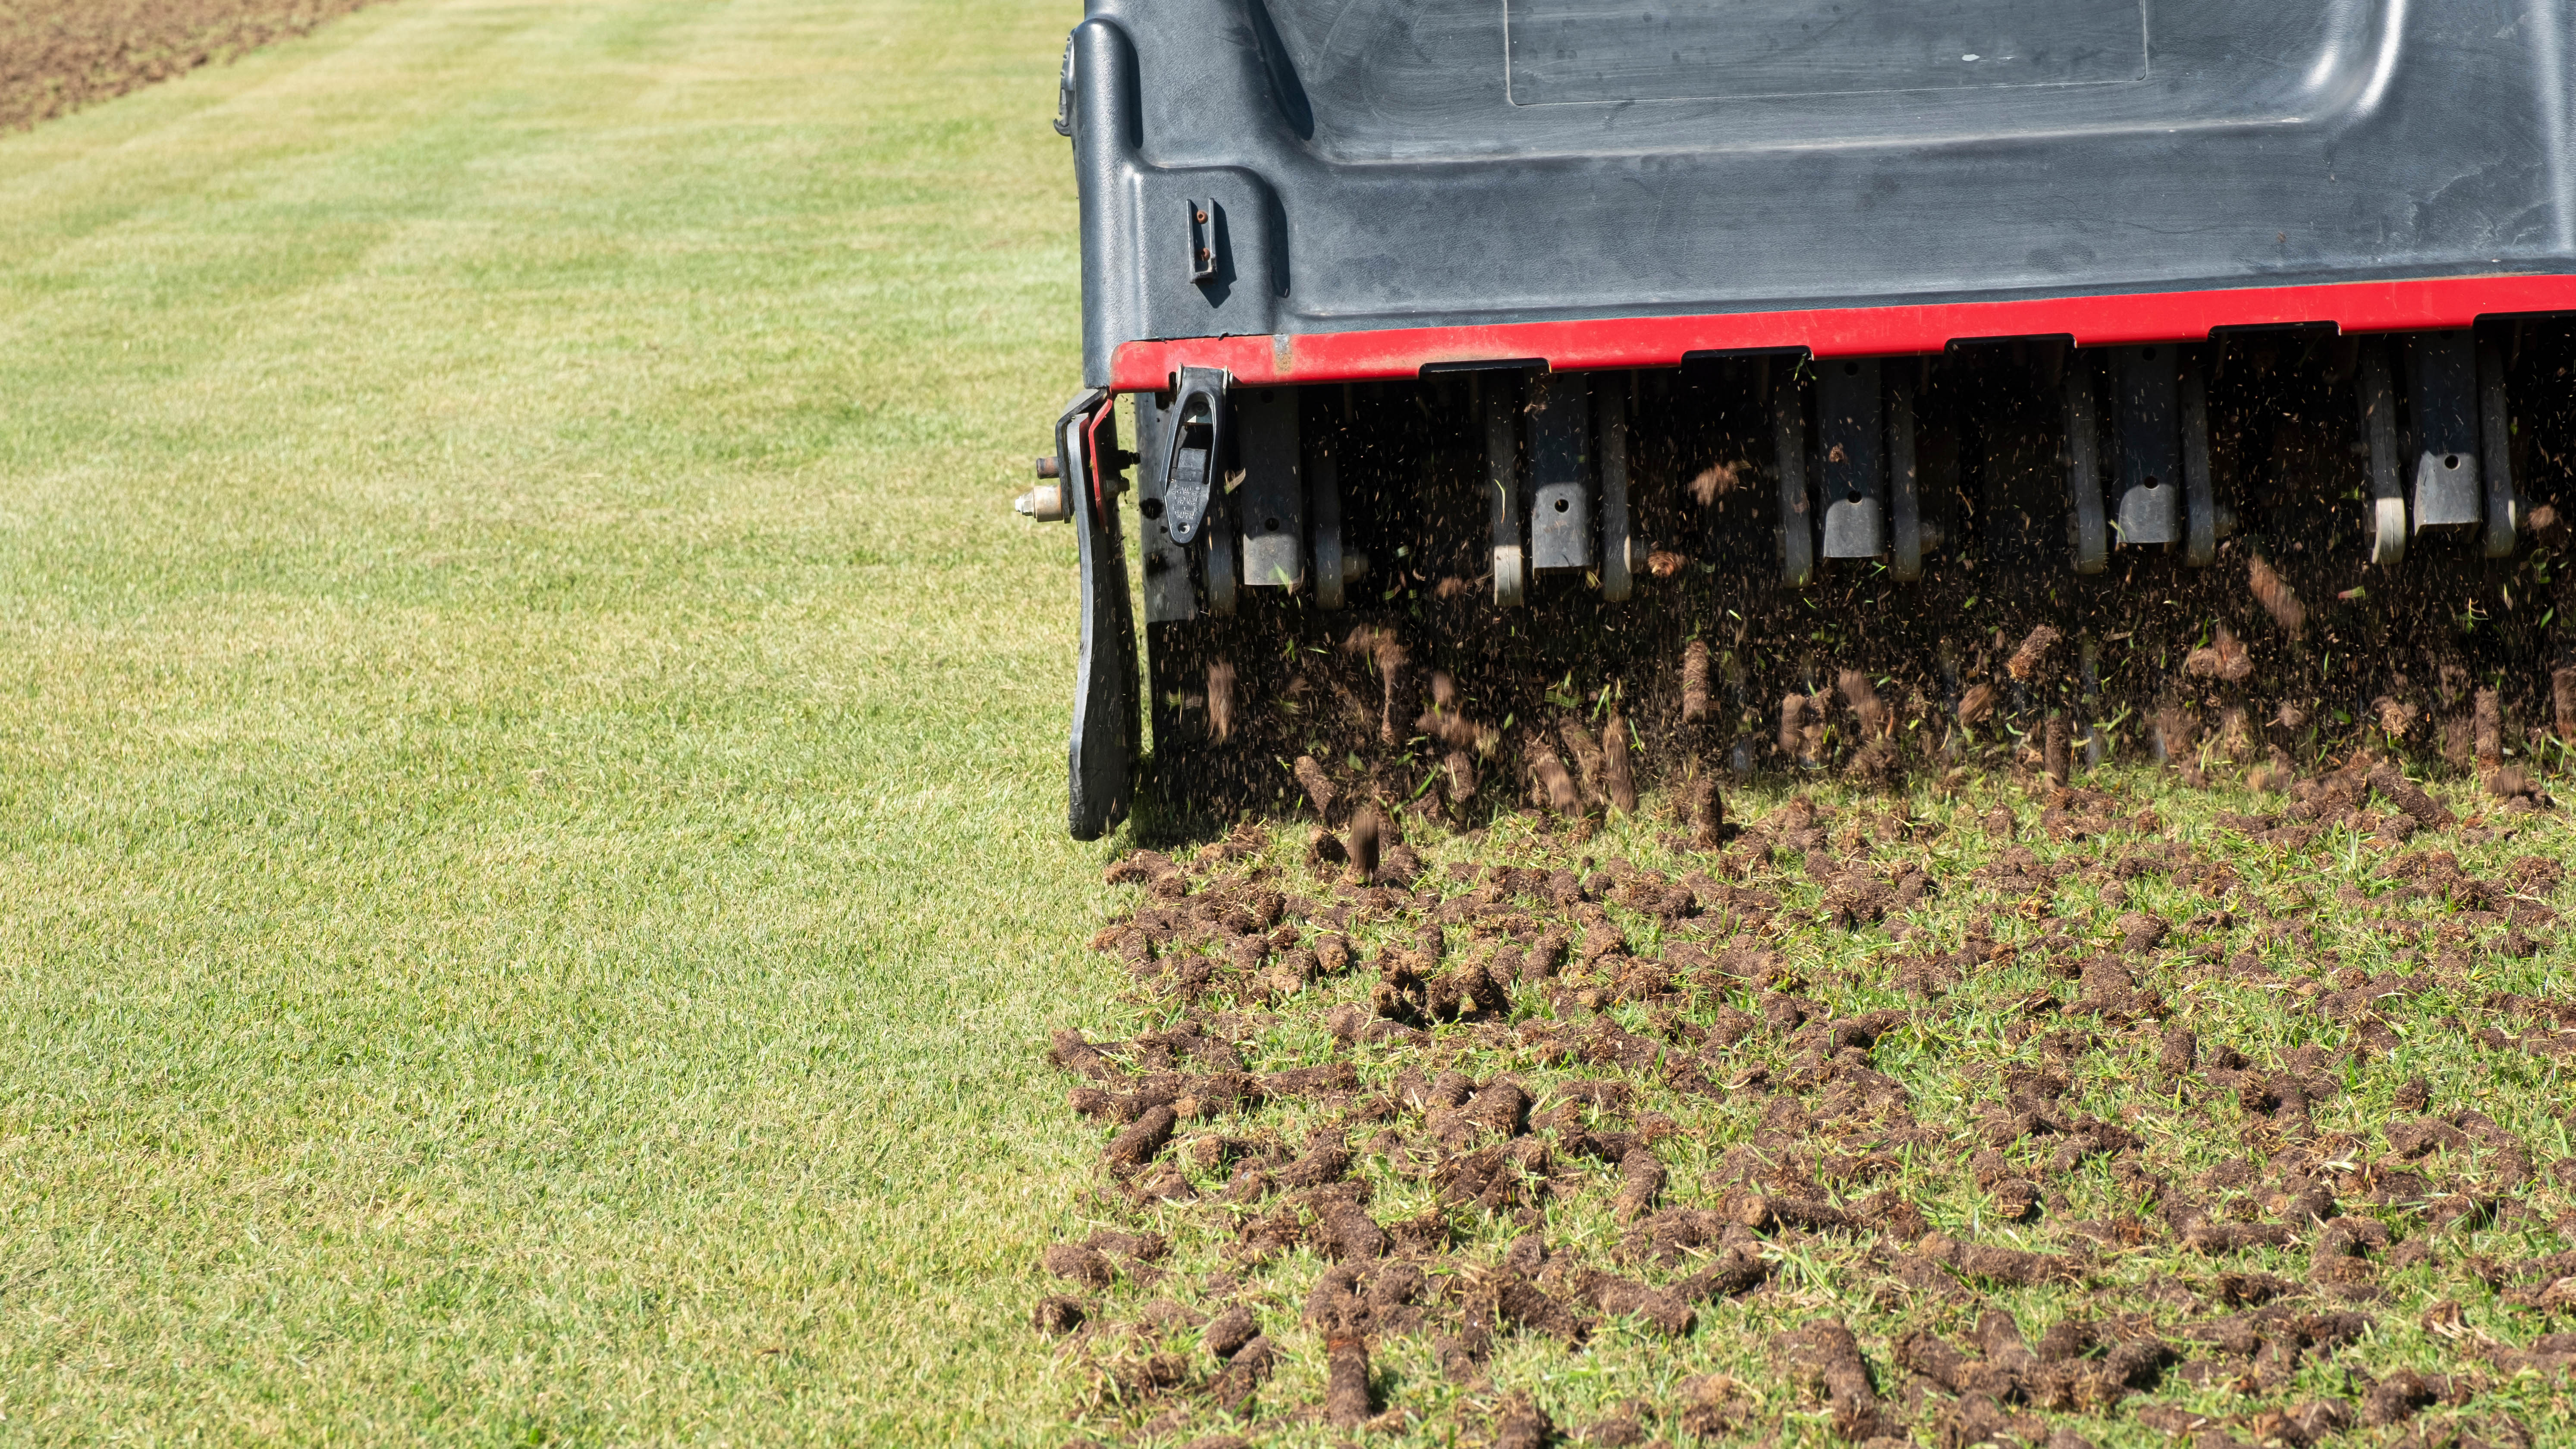 A core aerator used to aerate a lawn